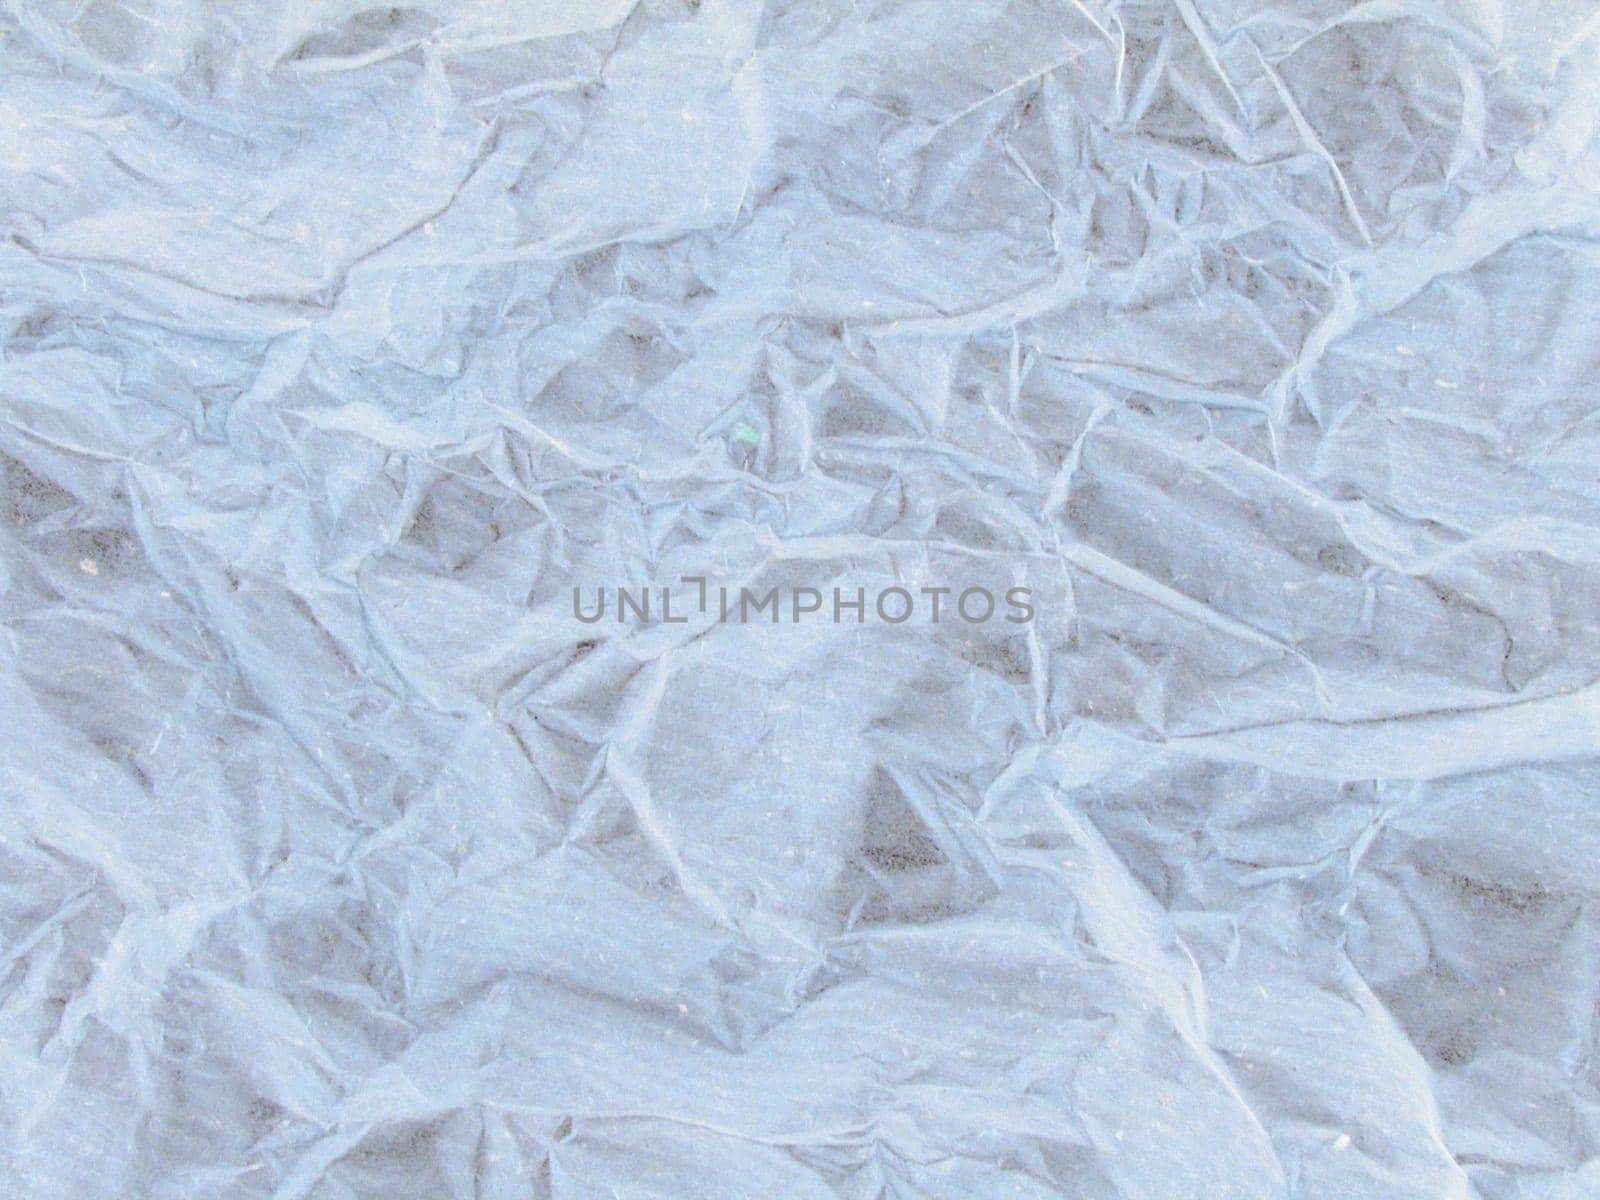 Background of wrinkled paper in white color by sanisra